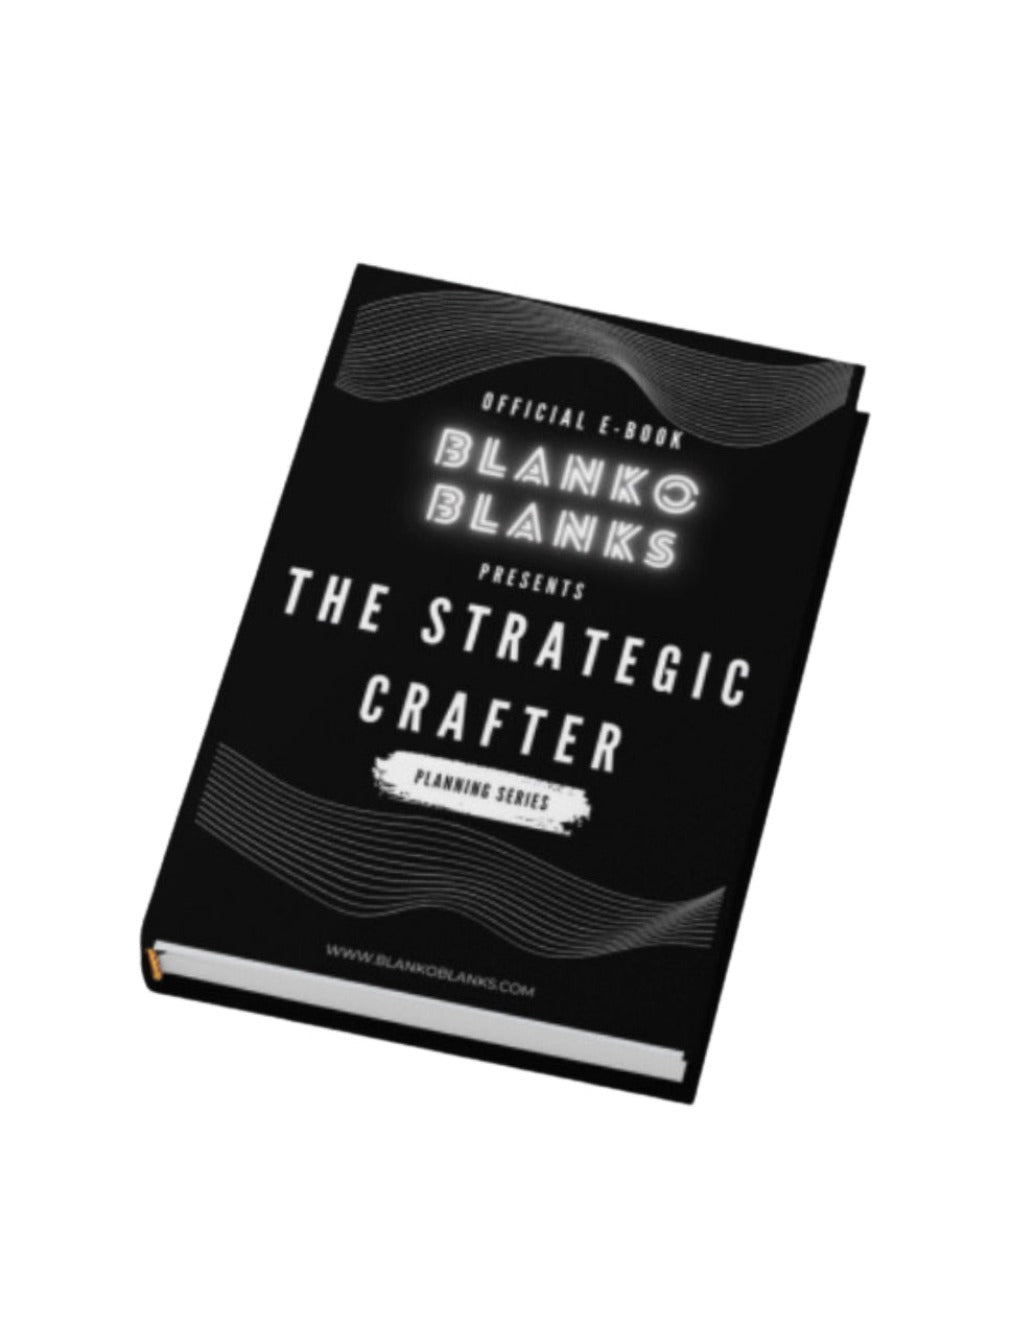 The Strategic Planned E Book to show you how to start thinking about a business start up